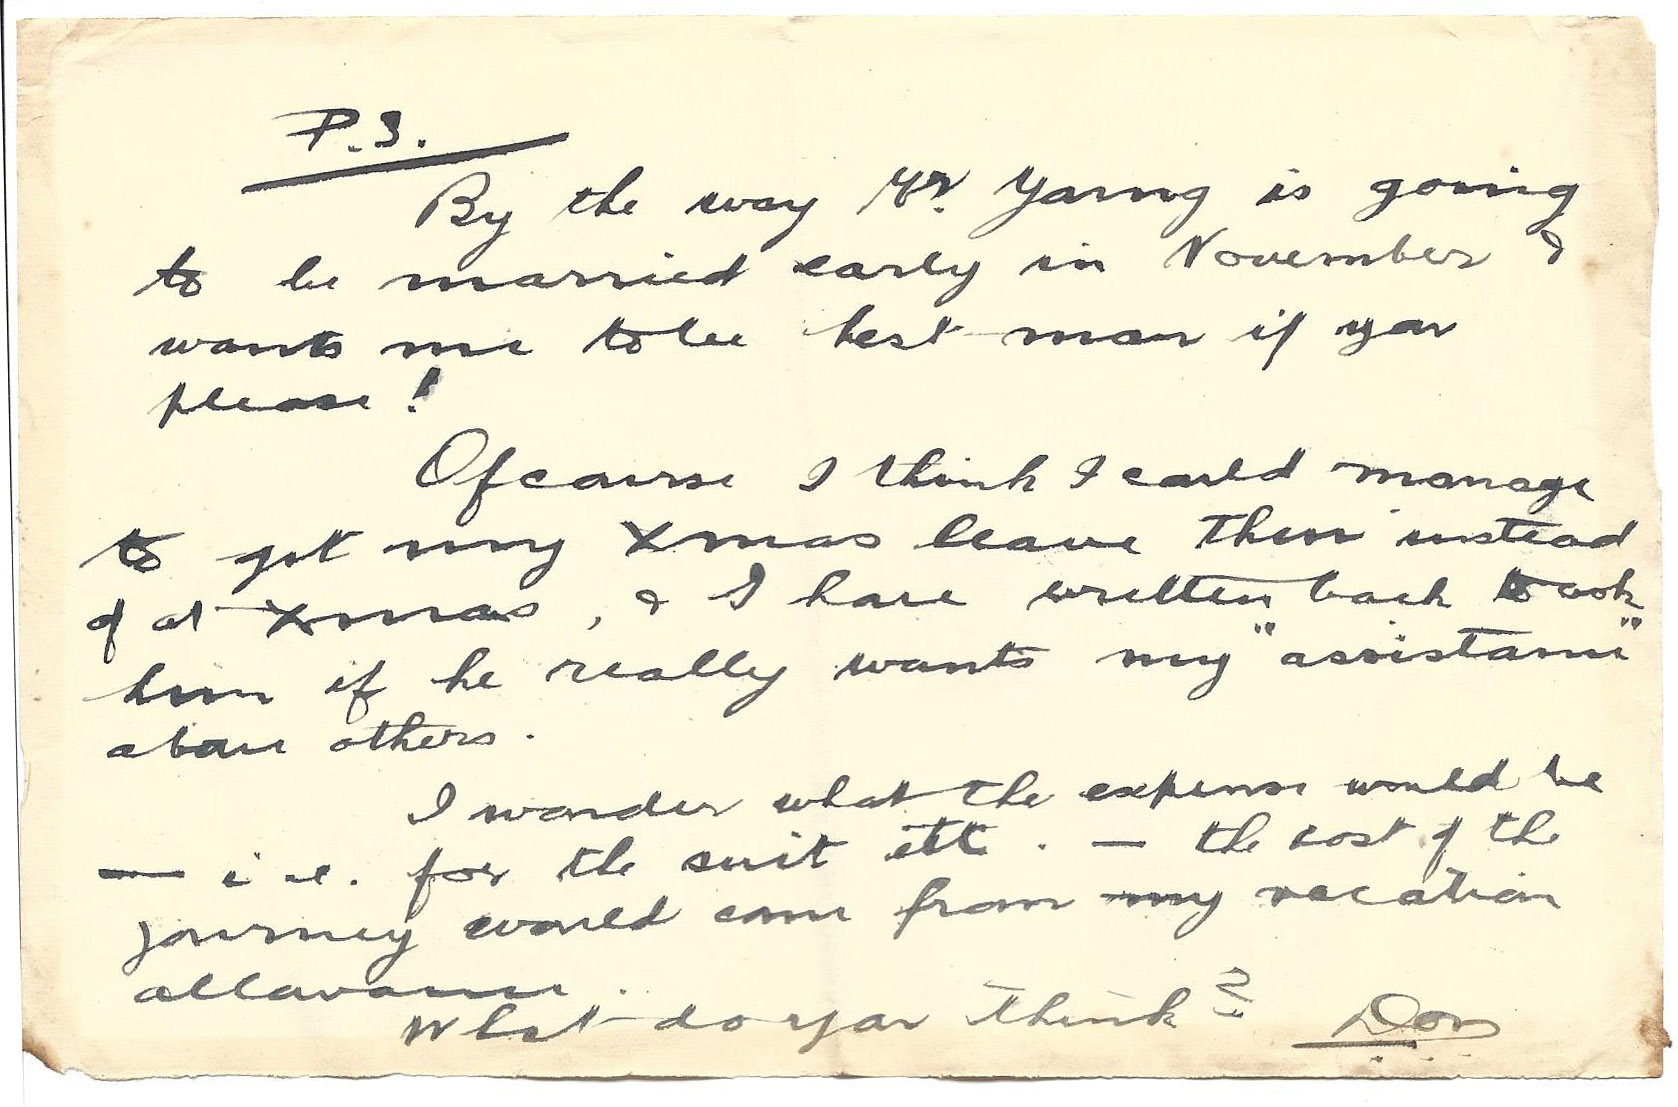 1919-09-26 Page 3 letter by Donald Bearman